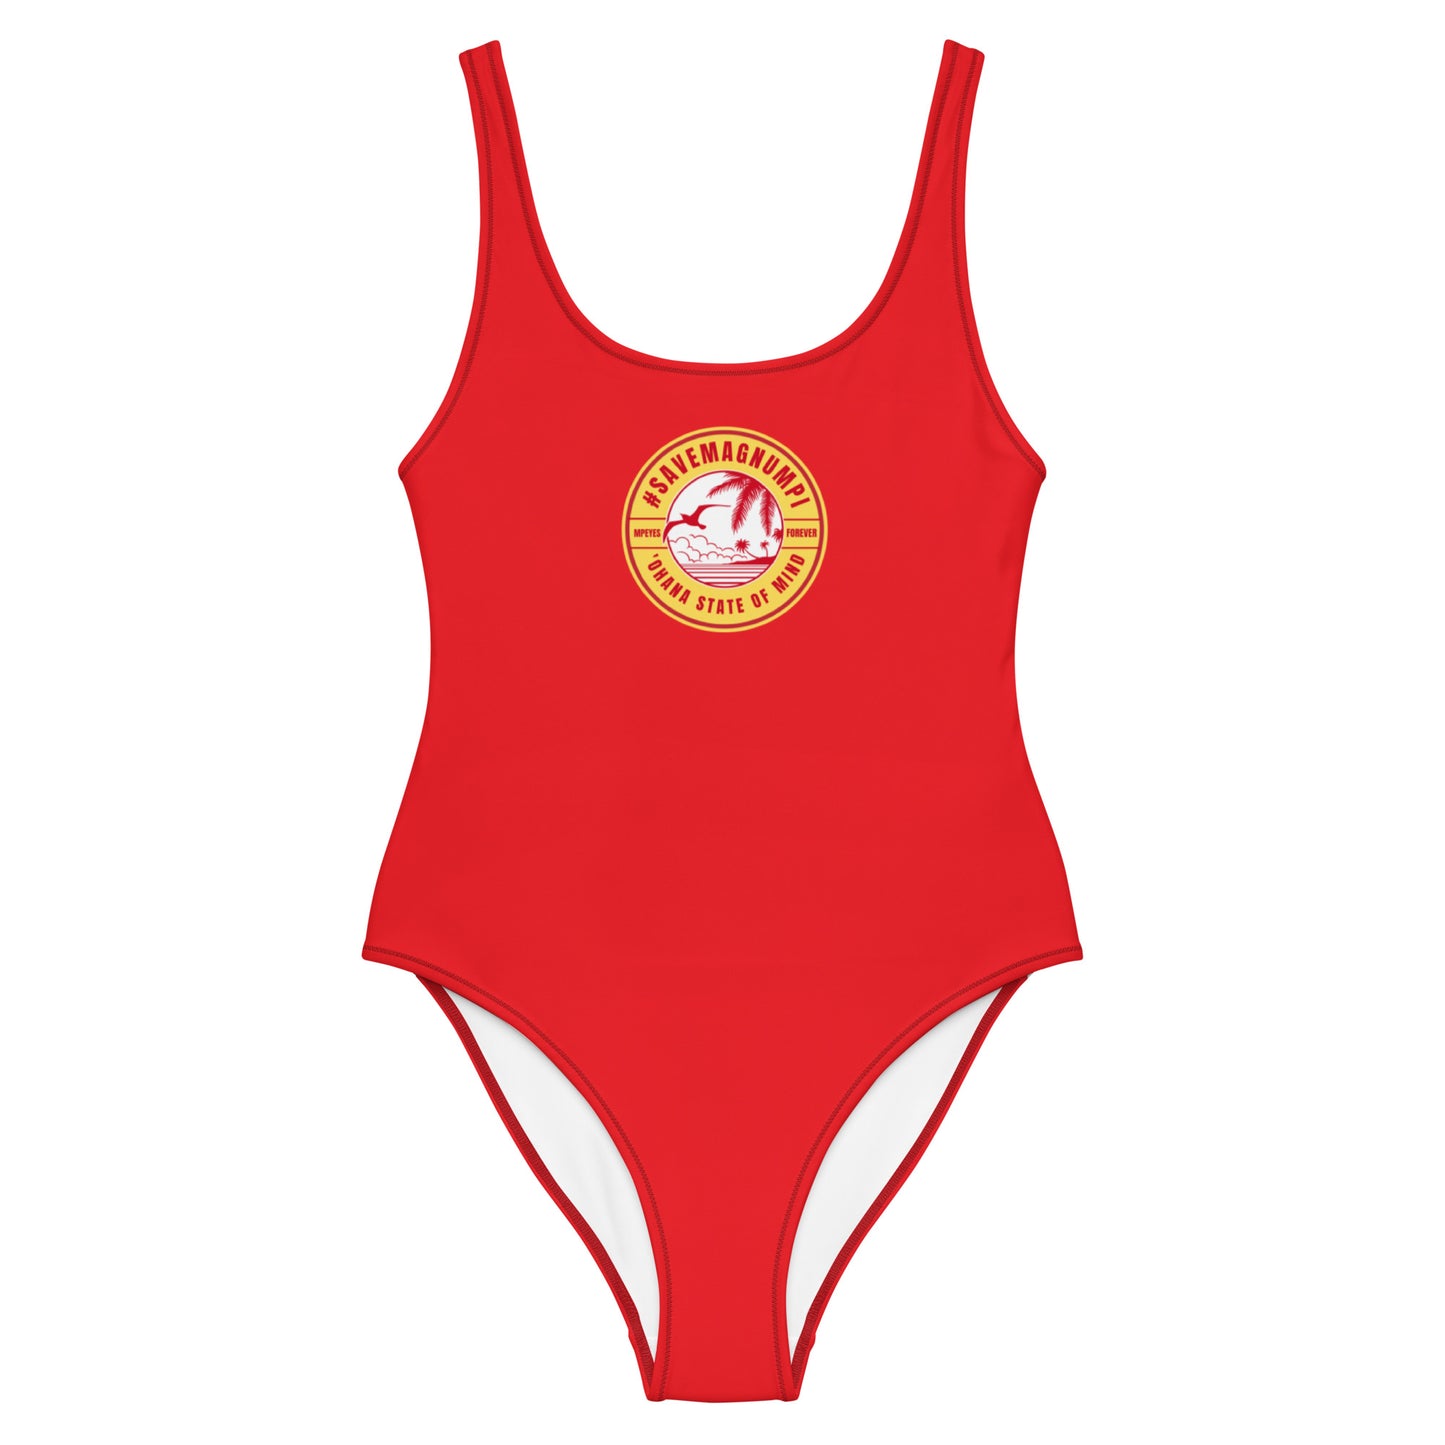 #SAVEMAGNUMPI One-Piece Swimsuit - Red